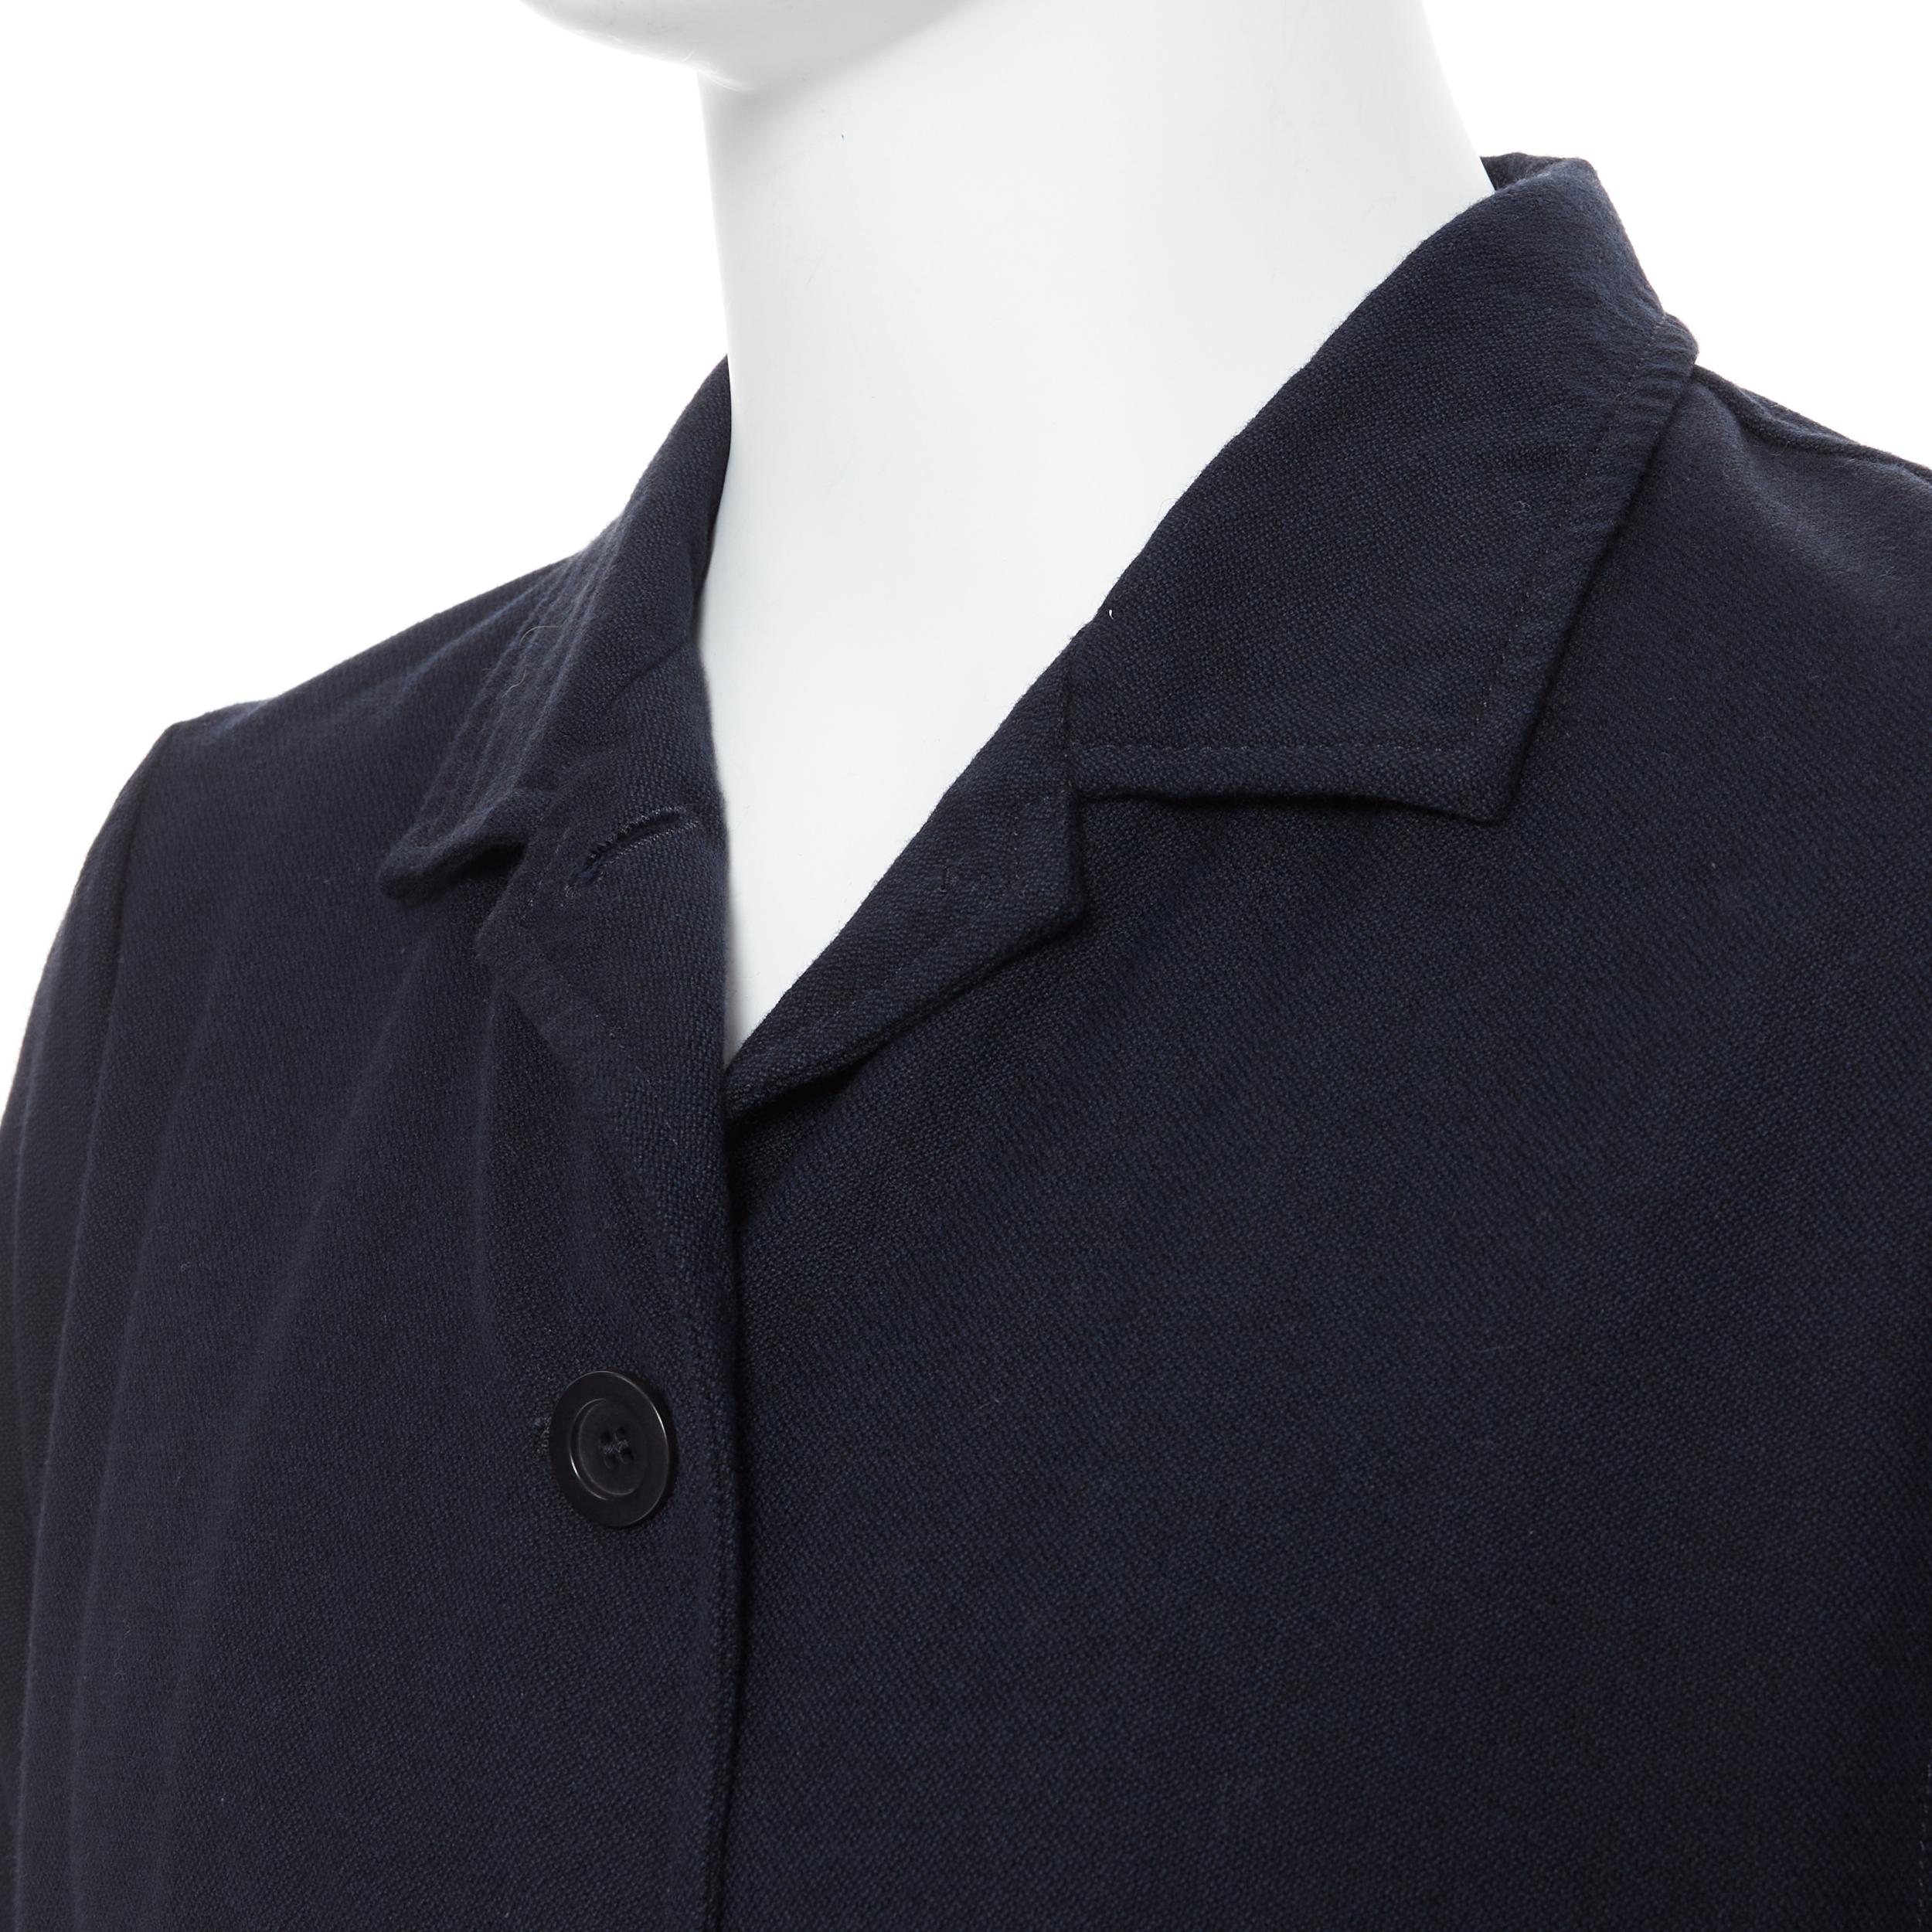 CASEY CASEY cotton wool navy spread collar button front 3/4 sleeve over shirt M Reference: PRCN/A00050 
Brand: Casey Casey 
Material: Cotton 
Color: Navy 
Pattern: Solid 
Closure: Button 
Extra Detail: Cotton wool blend. Spread collar. Button front